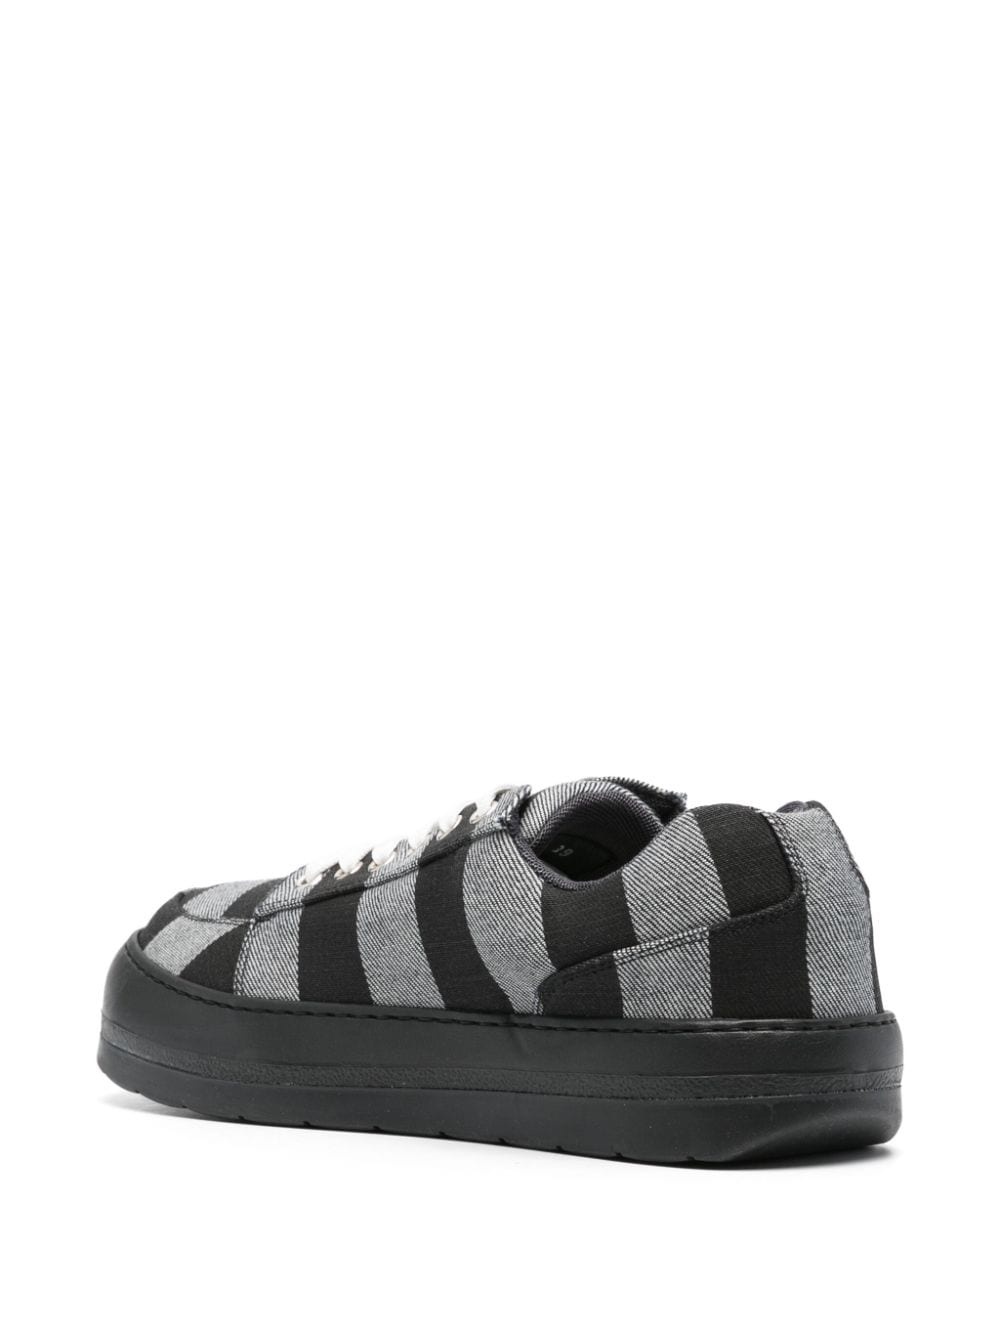 Dreamy Shoes striped sneakers - 3